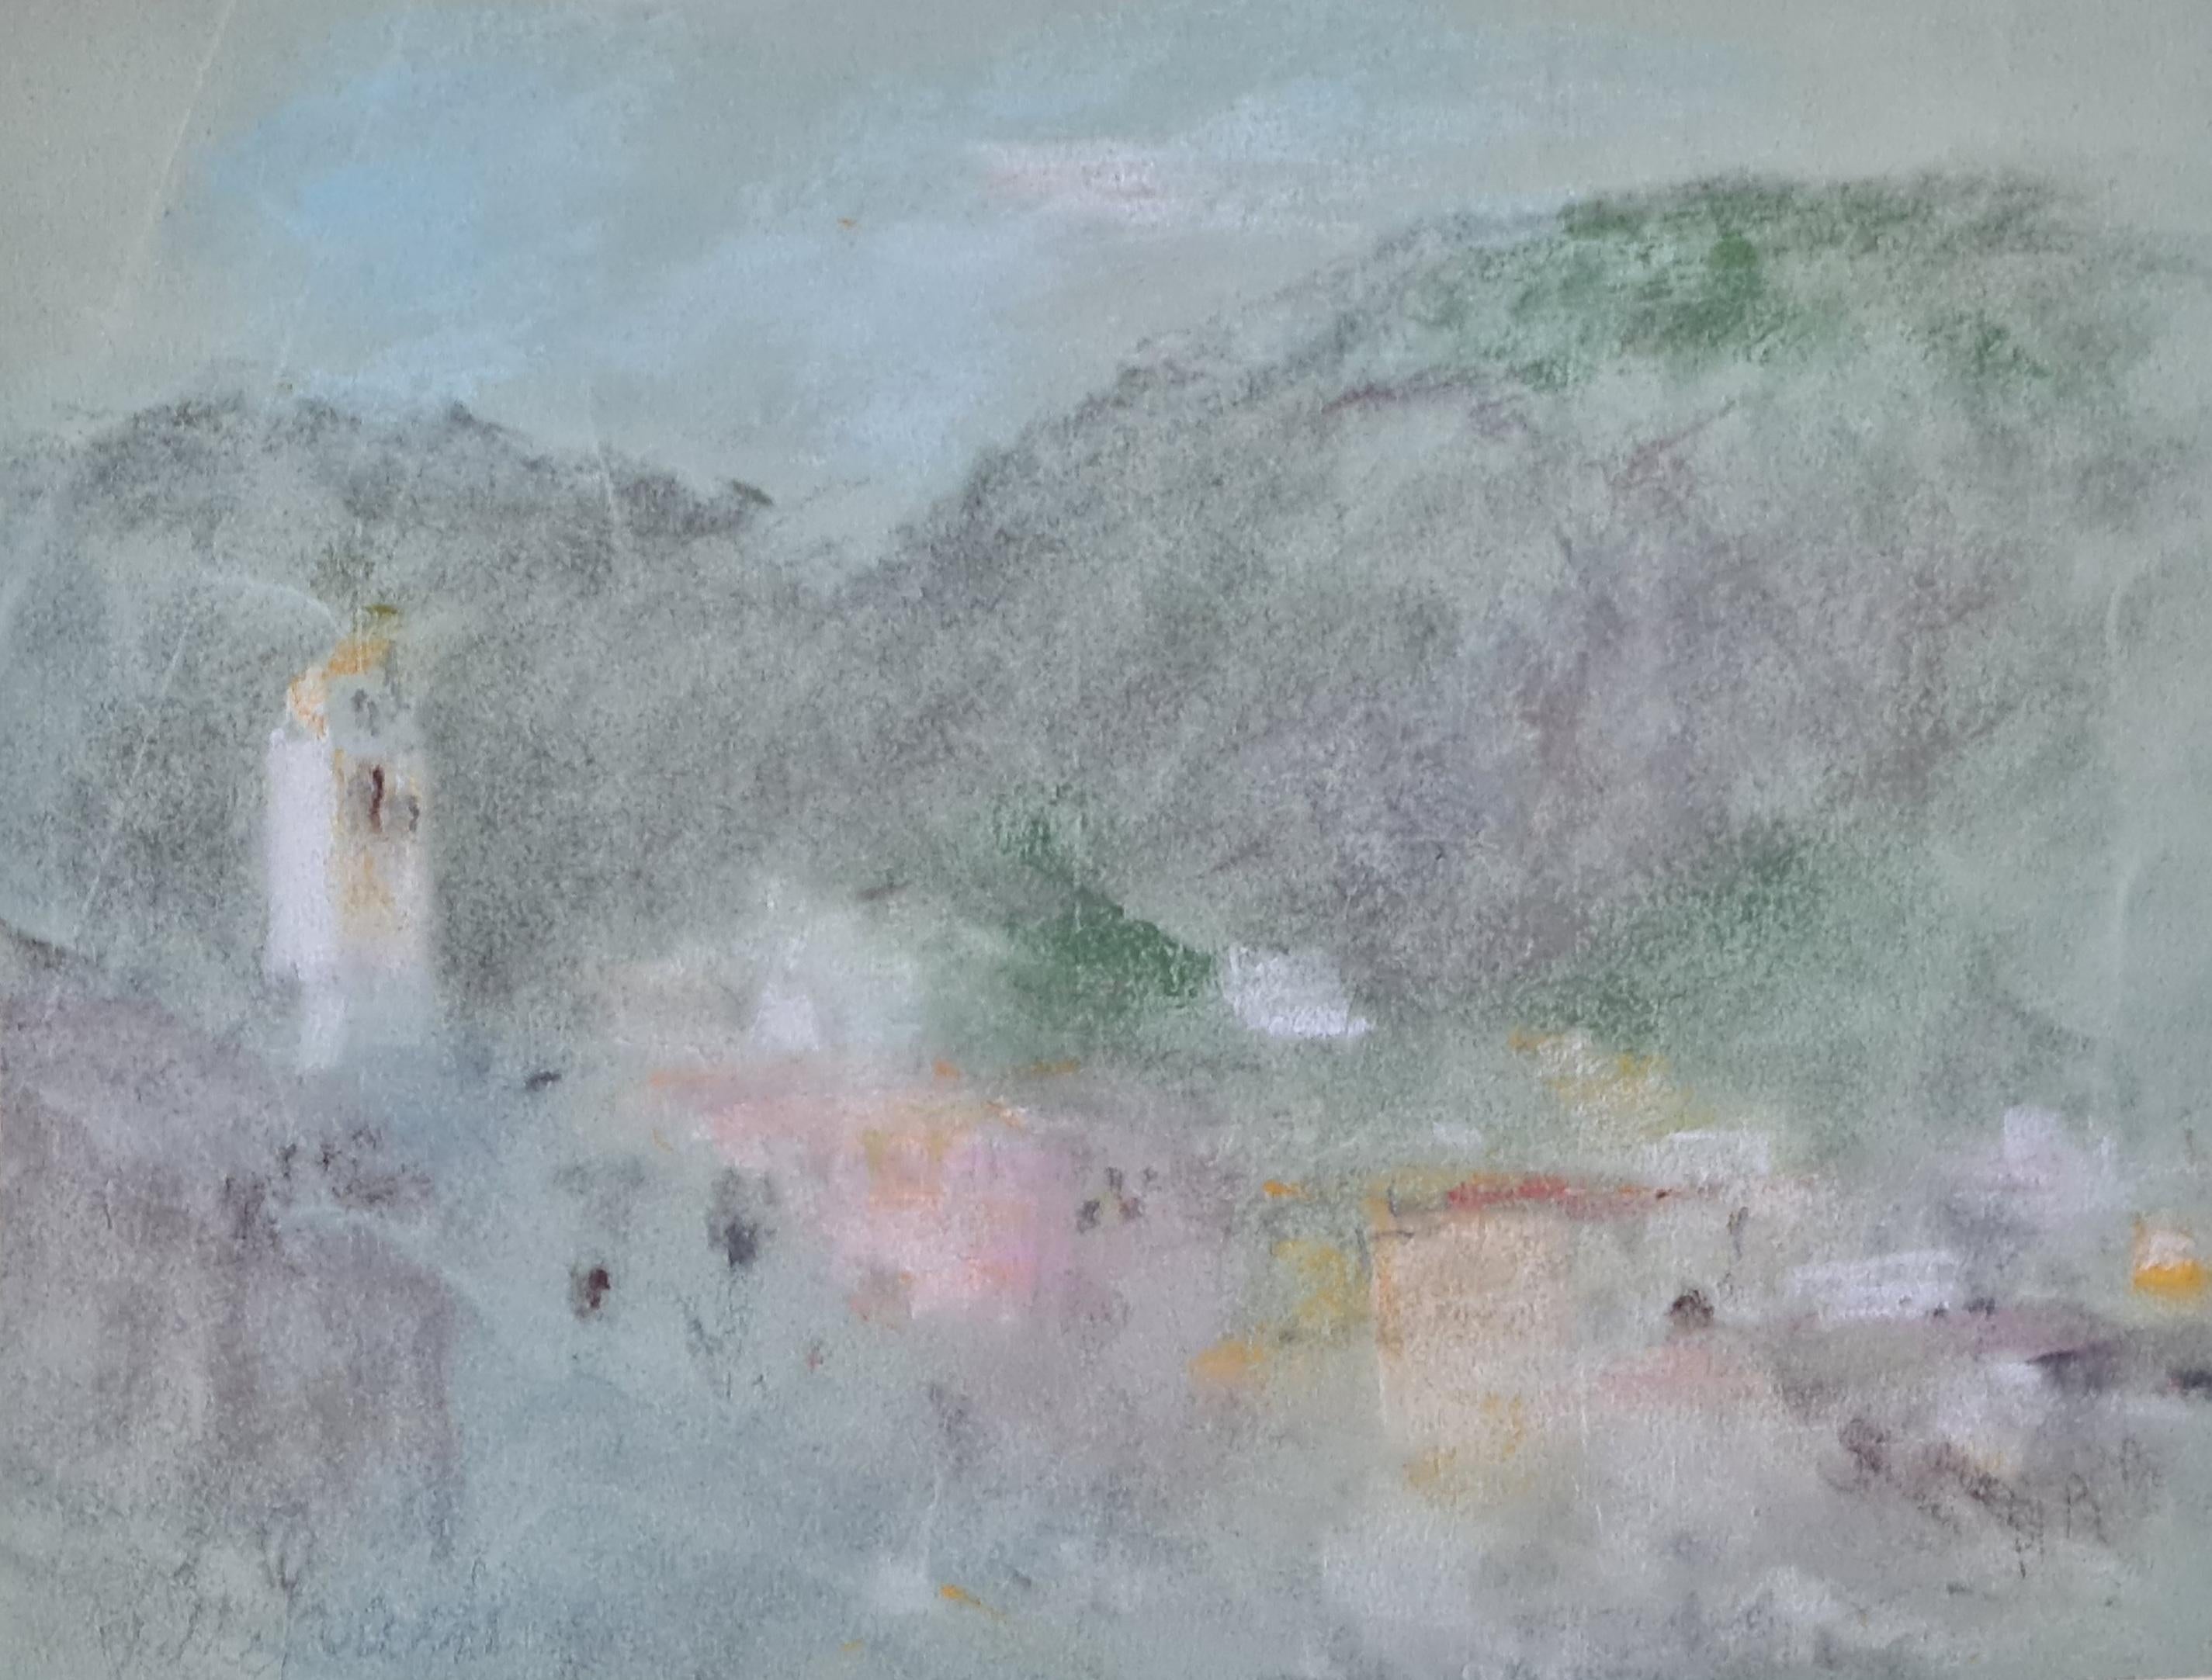 Impressionist View of Villefranche, South of France, in the style of Turner.